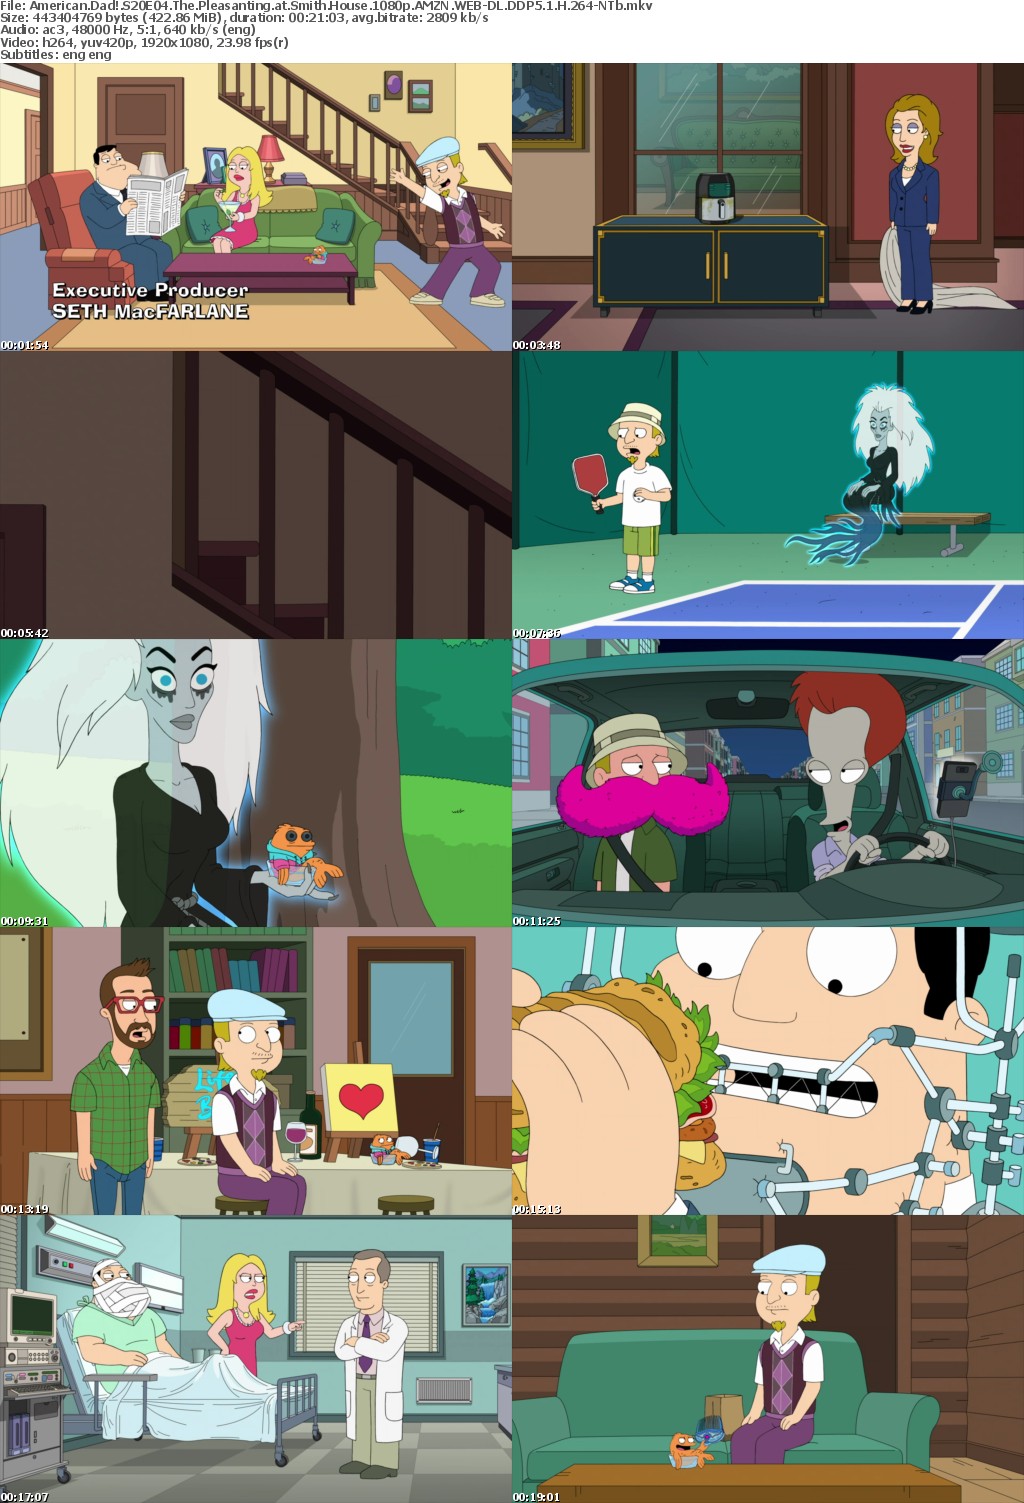 American Dad S20E04 The Pleasanting at Smith House 1080p AMZN WEBRip DDP5 1 x264-NTb